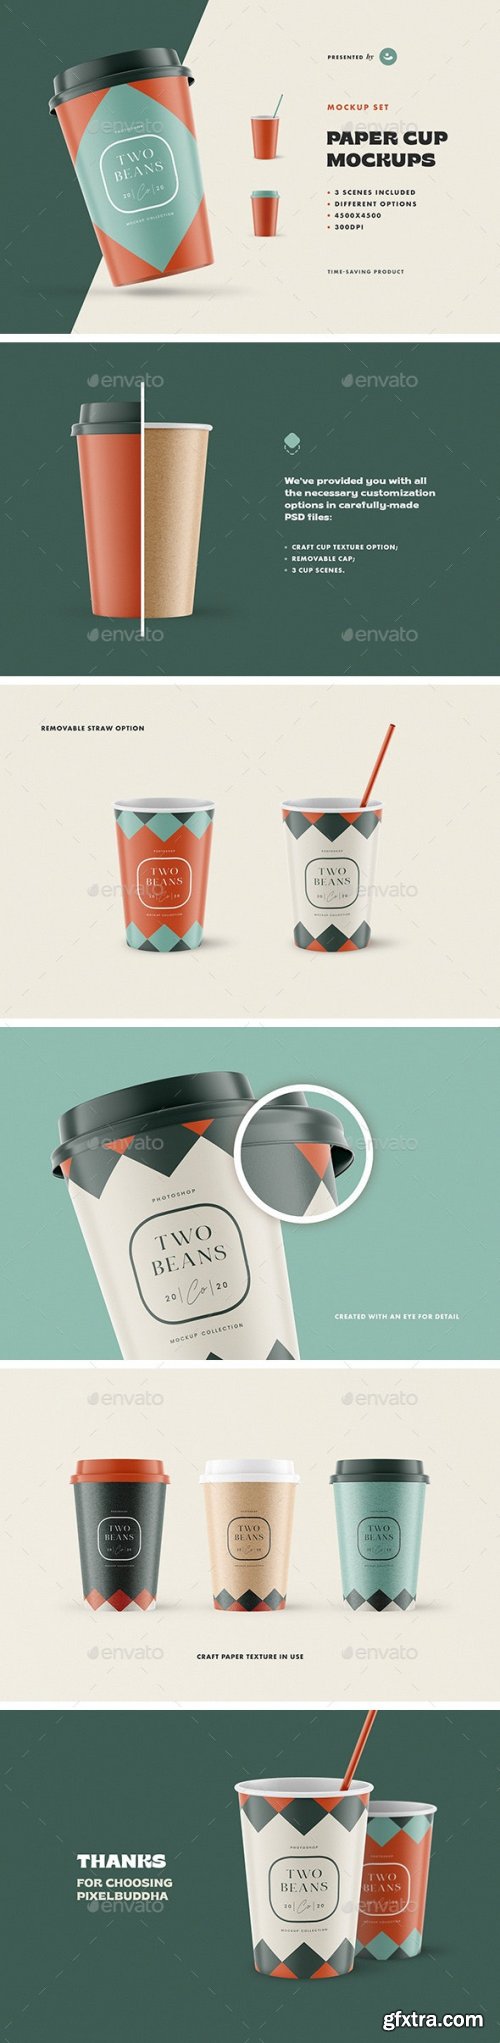 GraphicRiver - Paper Cup Mockups 26027868